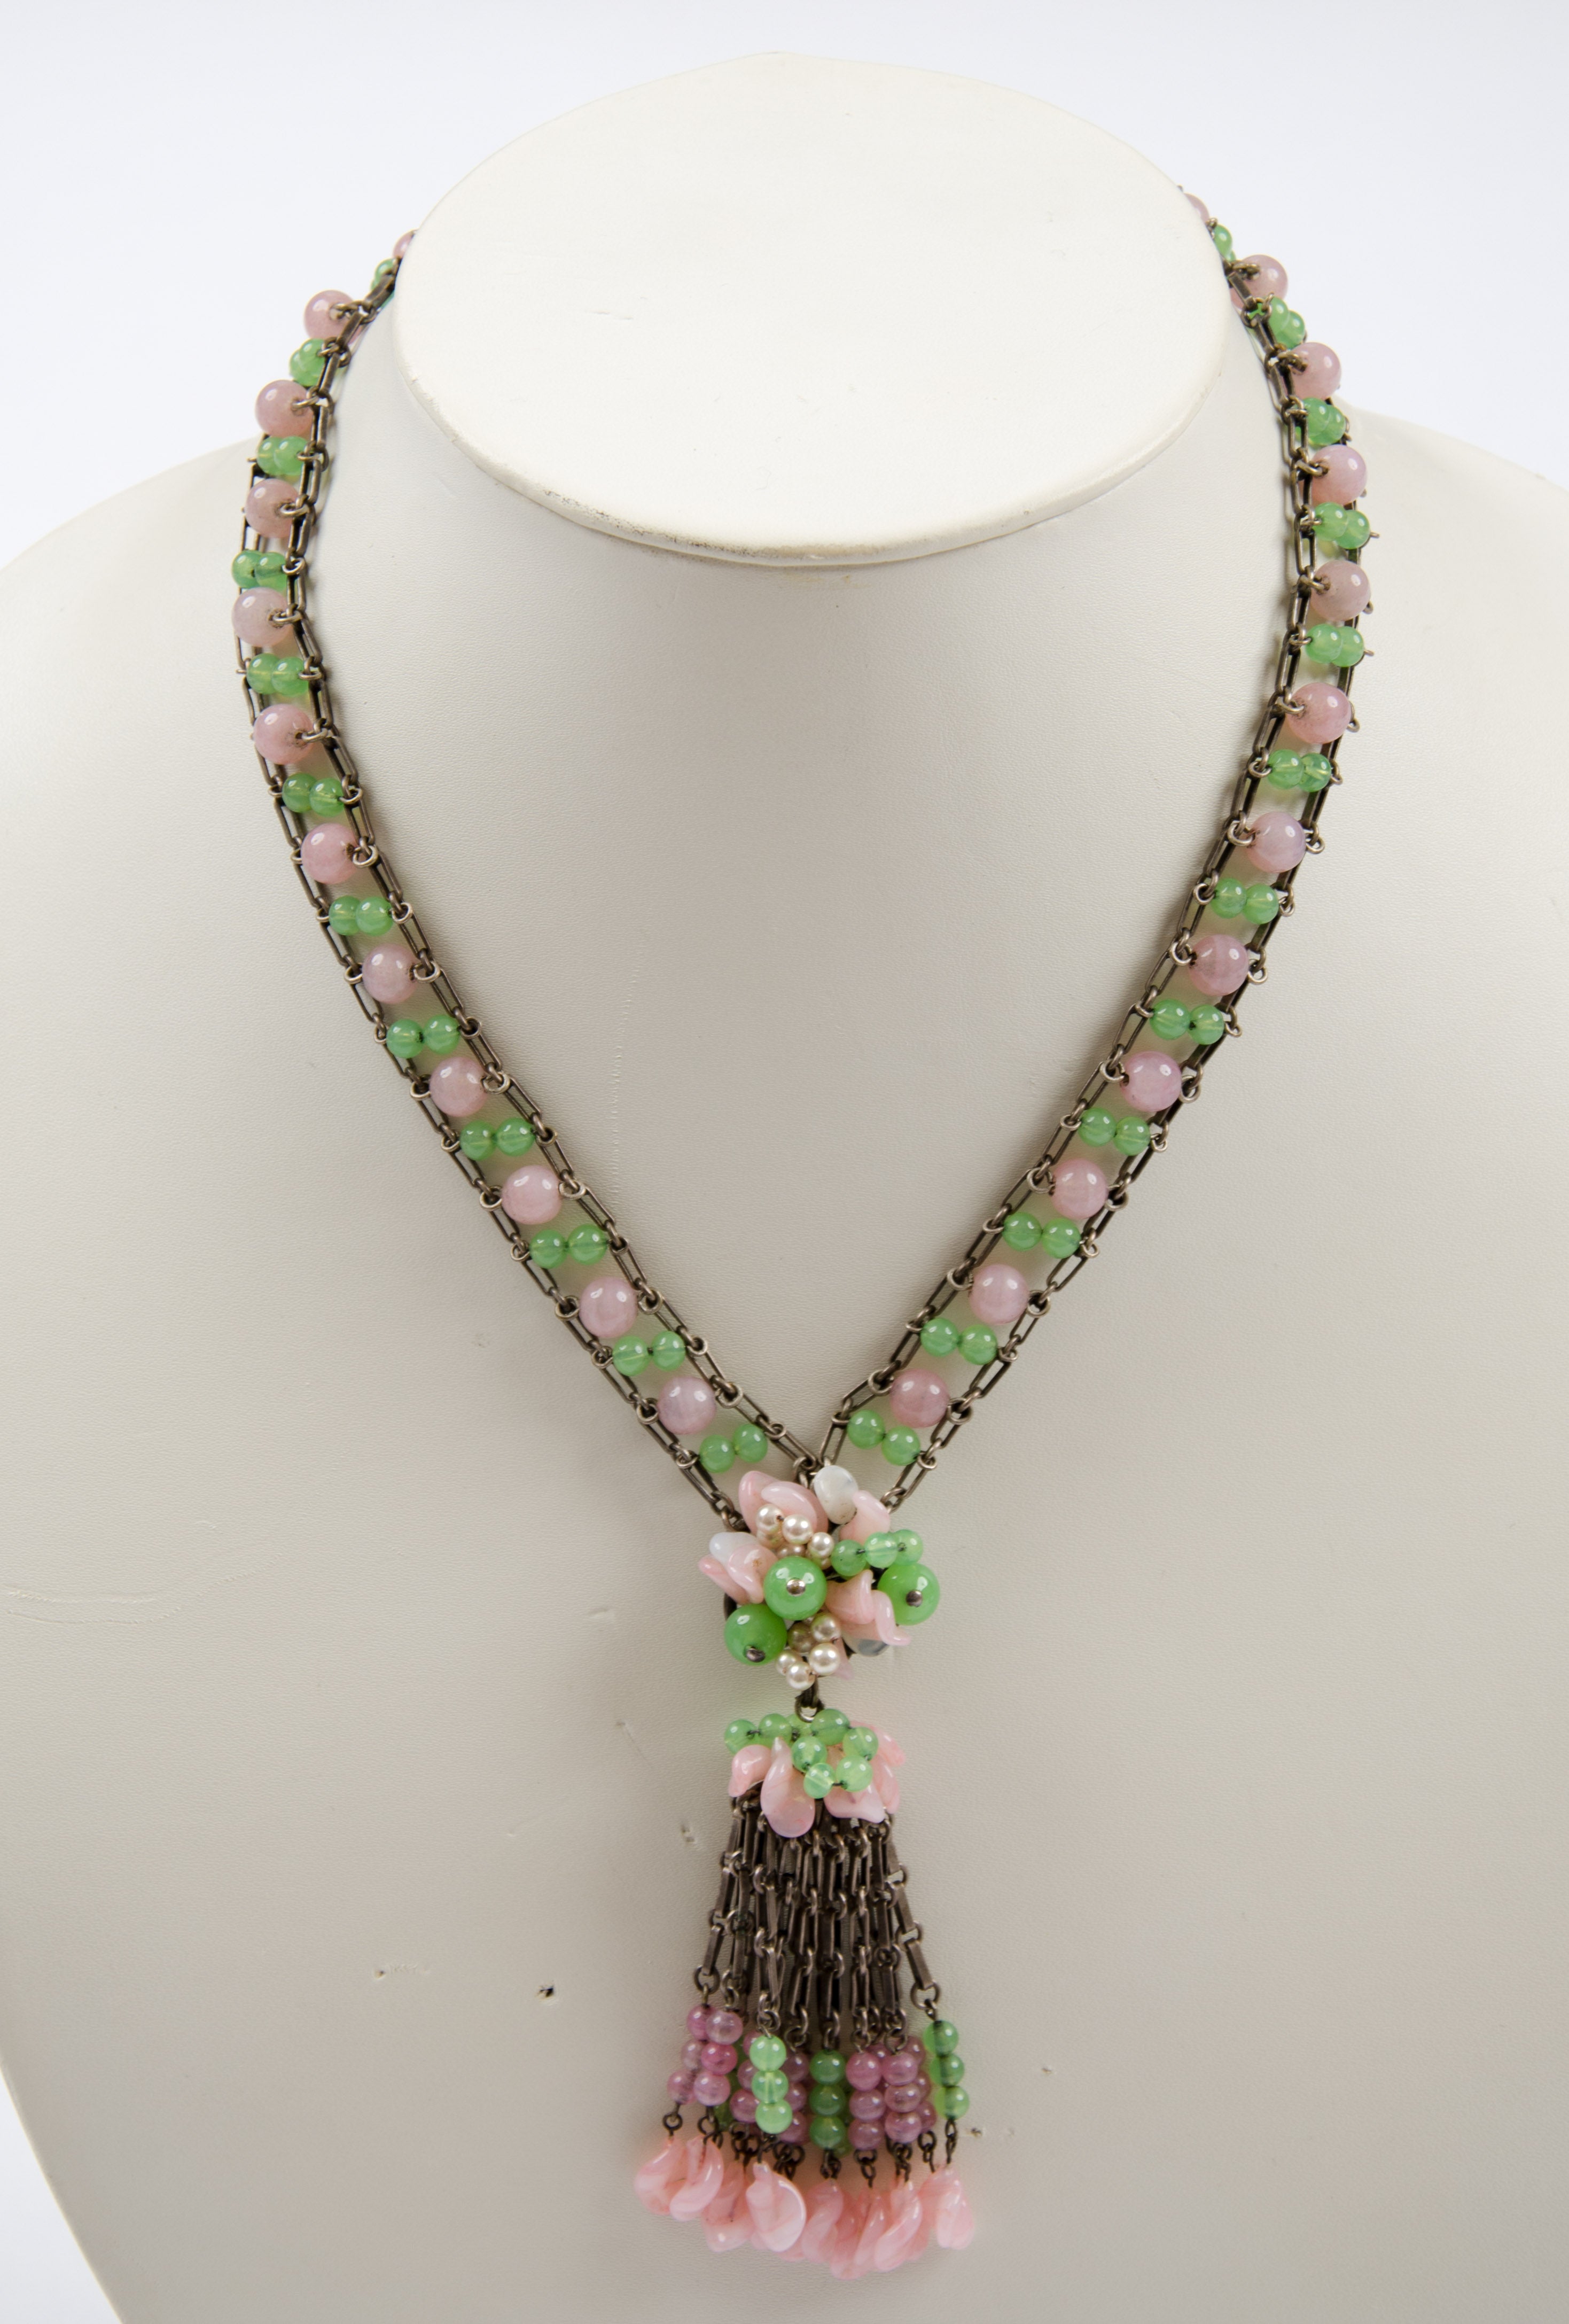 This necklace is a wonderfully colored, delicate example of the work of Louis Rousselet [Paris 1892-1980) - he was the head of one of the most important
pearl manufacturing workshops during the 20th century. He was apprenticed as a glass bead